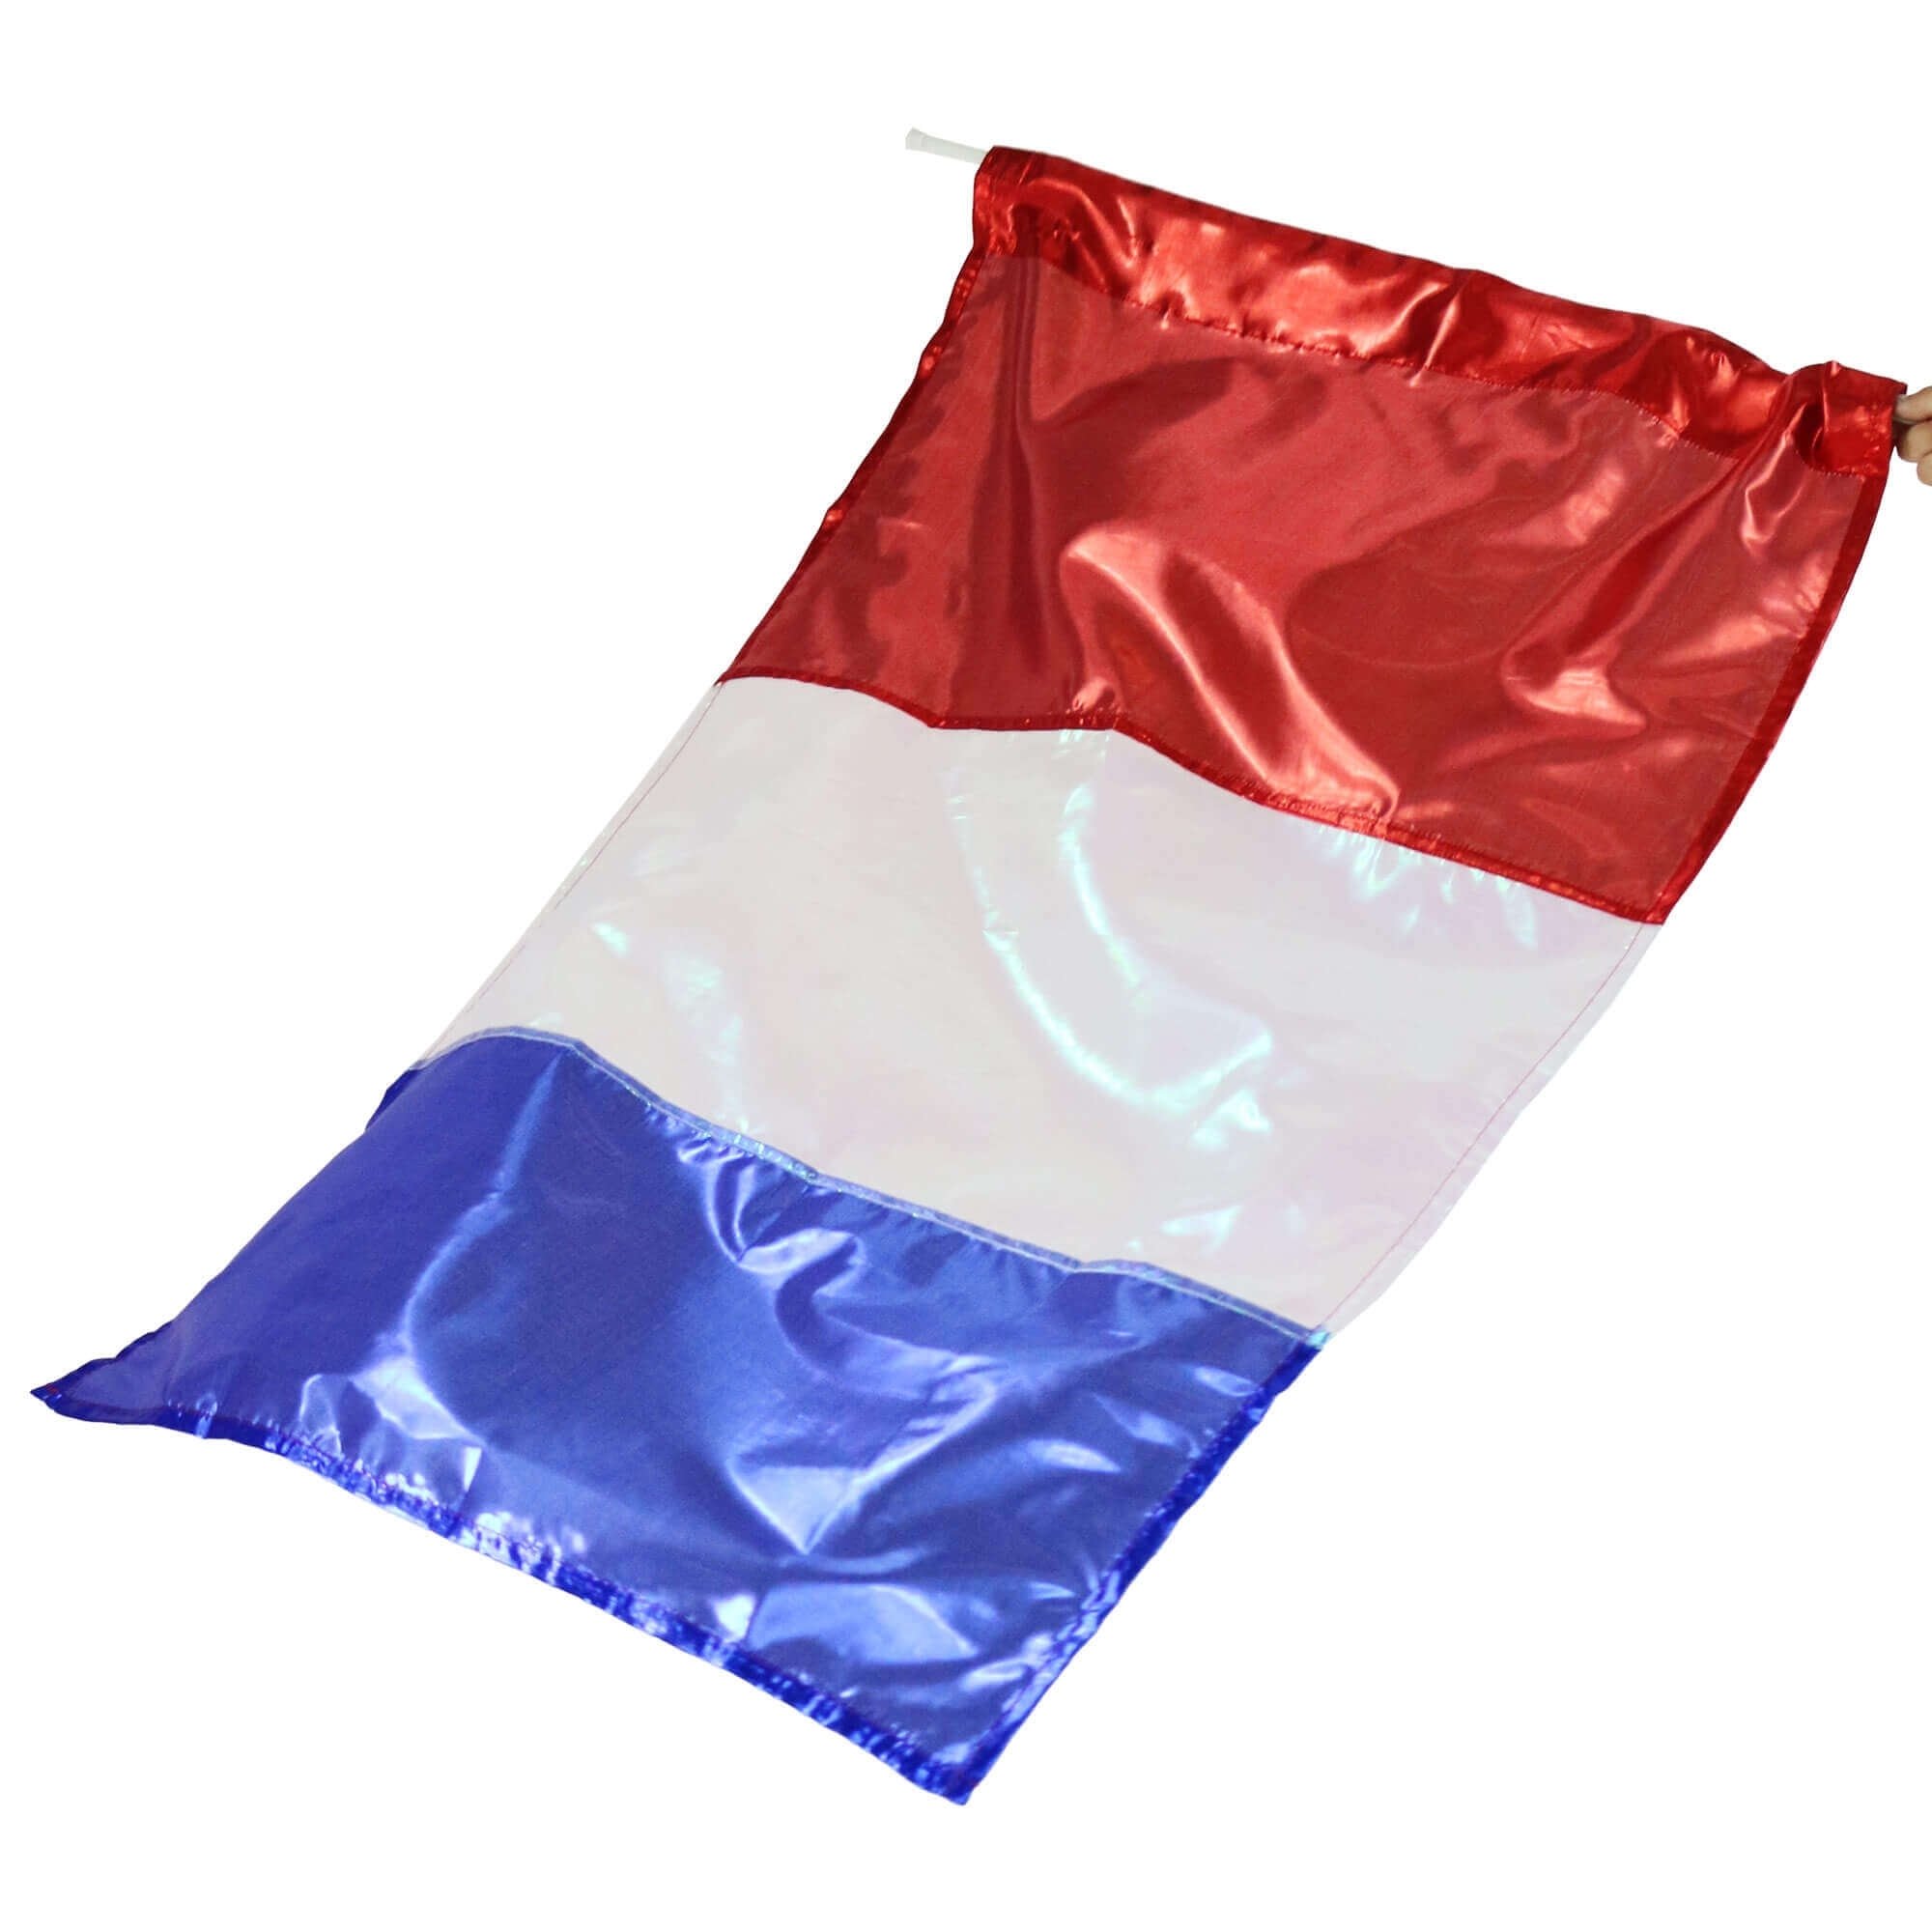 Metallic Flag with Rod - Click Image to Close